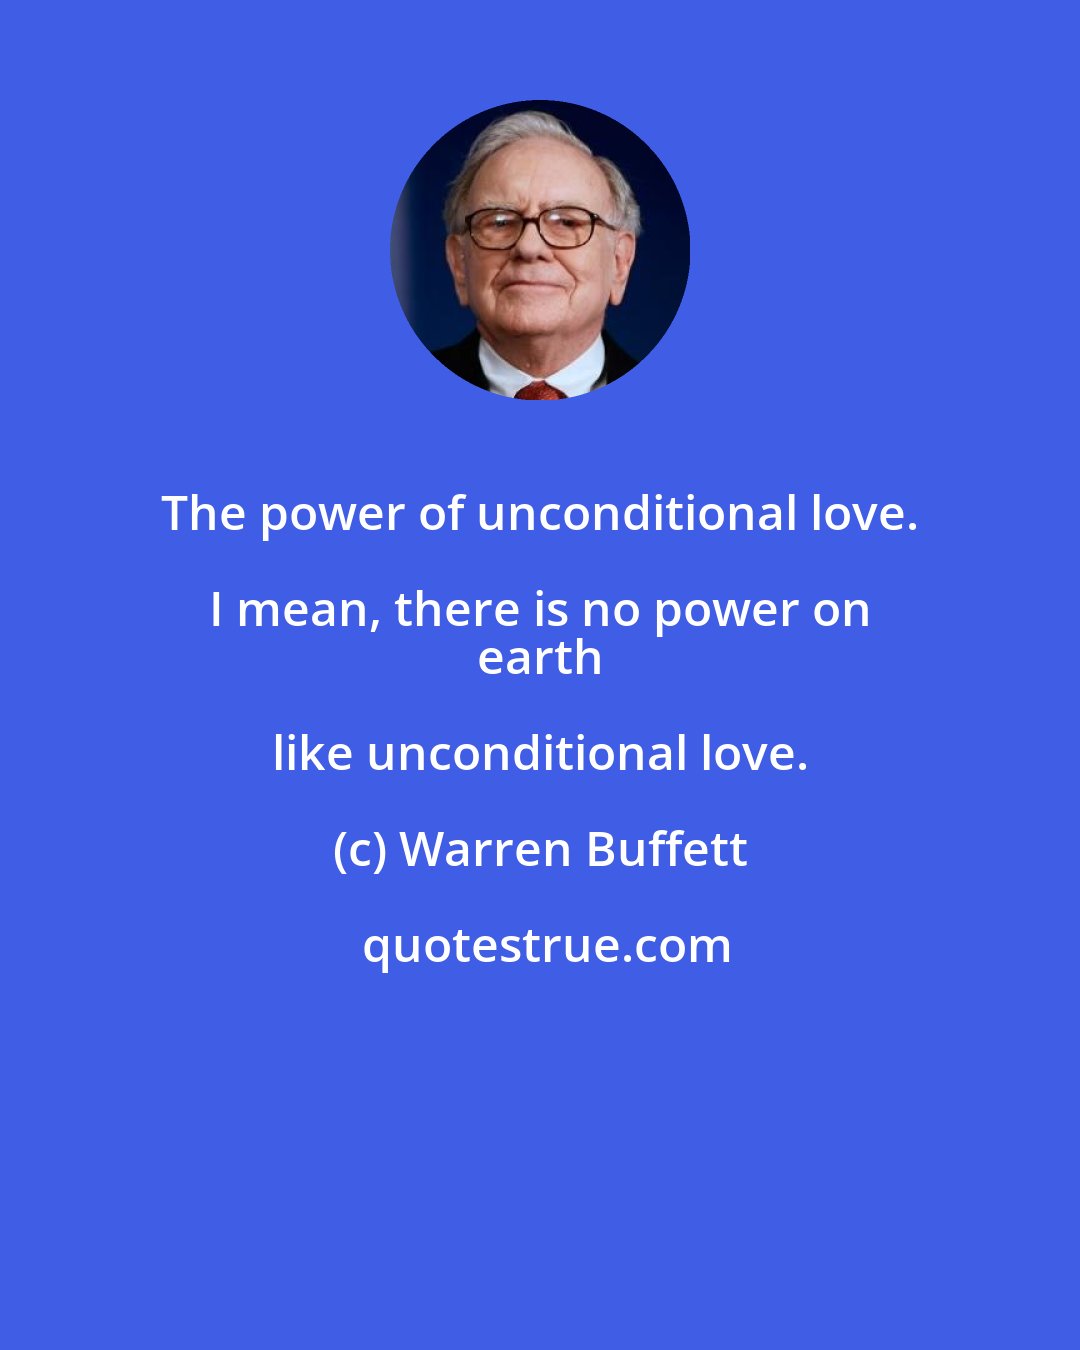 Warren Buffett: The power of unconditional love. I mean, there is no power on 
 earth like unconditional love.